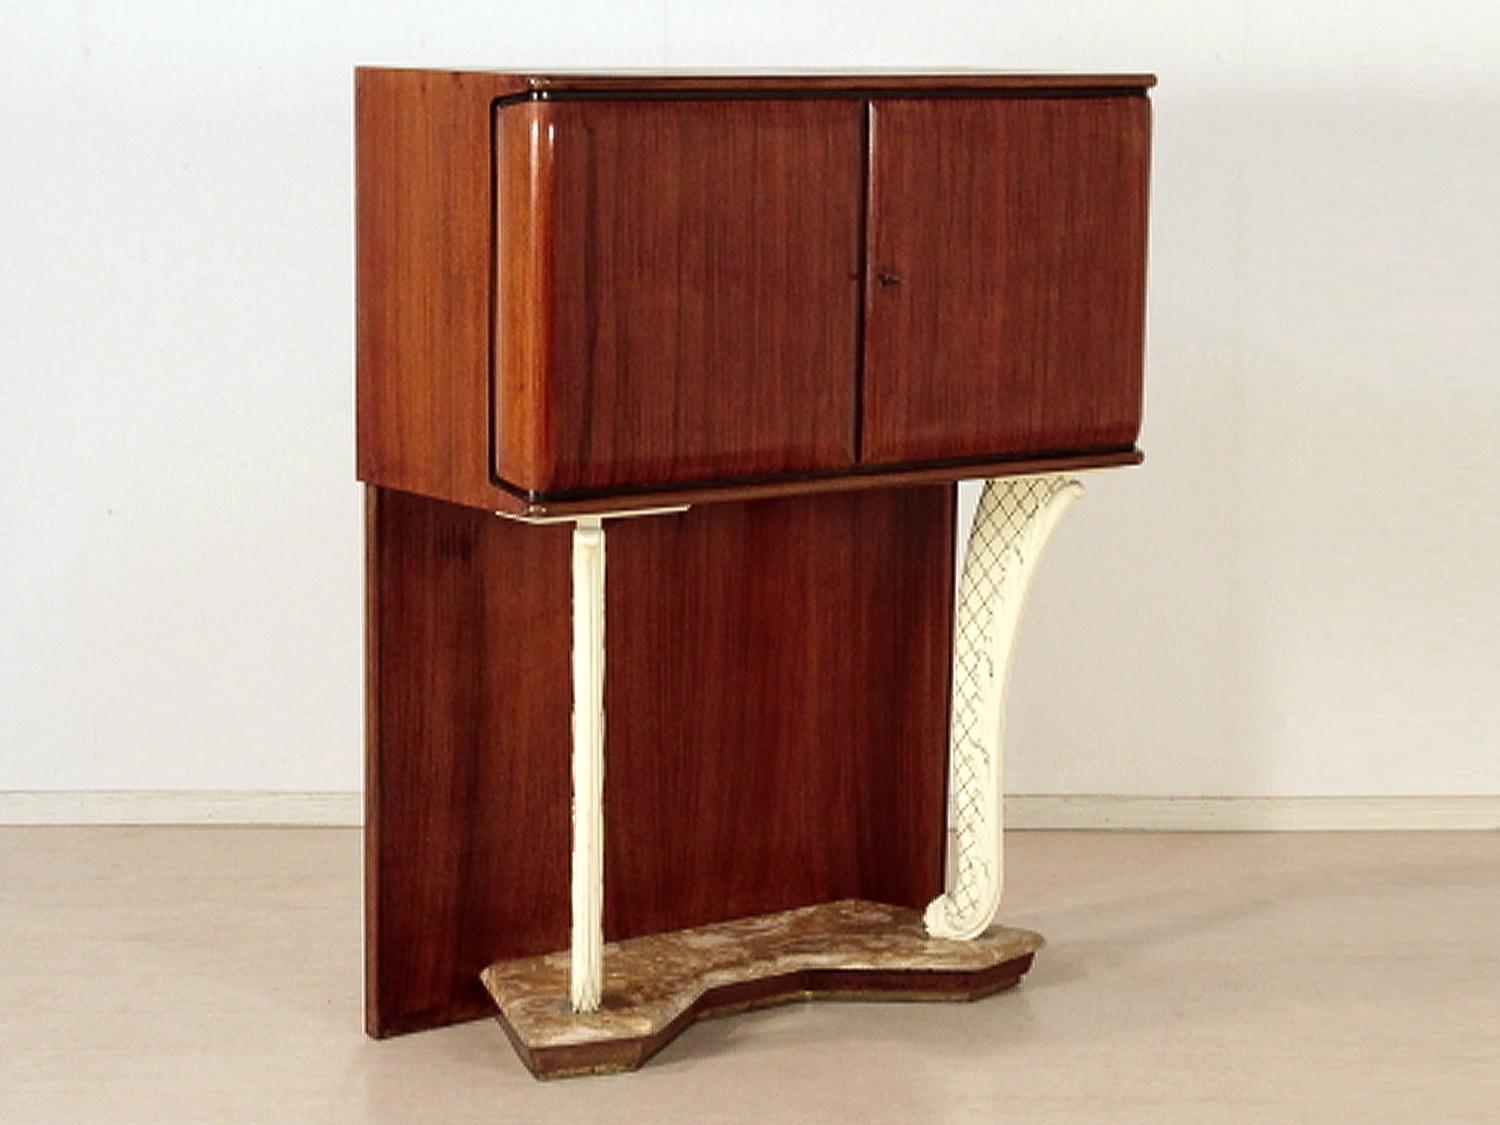 Italian mid-century teakwood wetbar, designed in the style of Vittorio Dassi in the 1950s.
The cabinet hiding a glass shelf with mirror on the back and is equipped with an internal lighting system, opening the two doors turns on automatically,